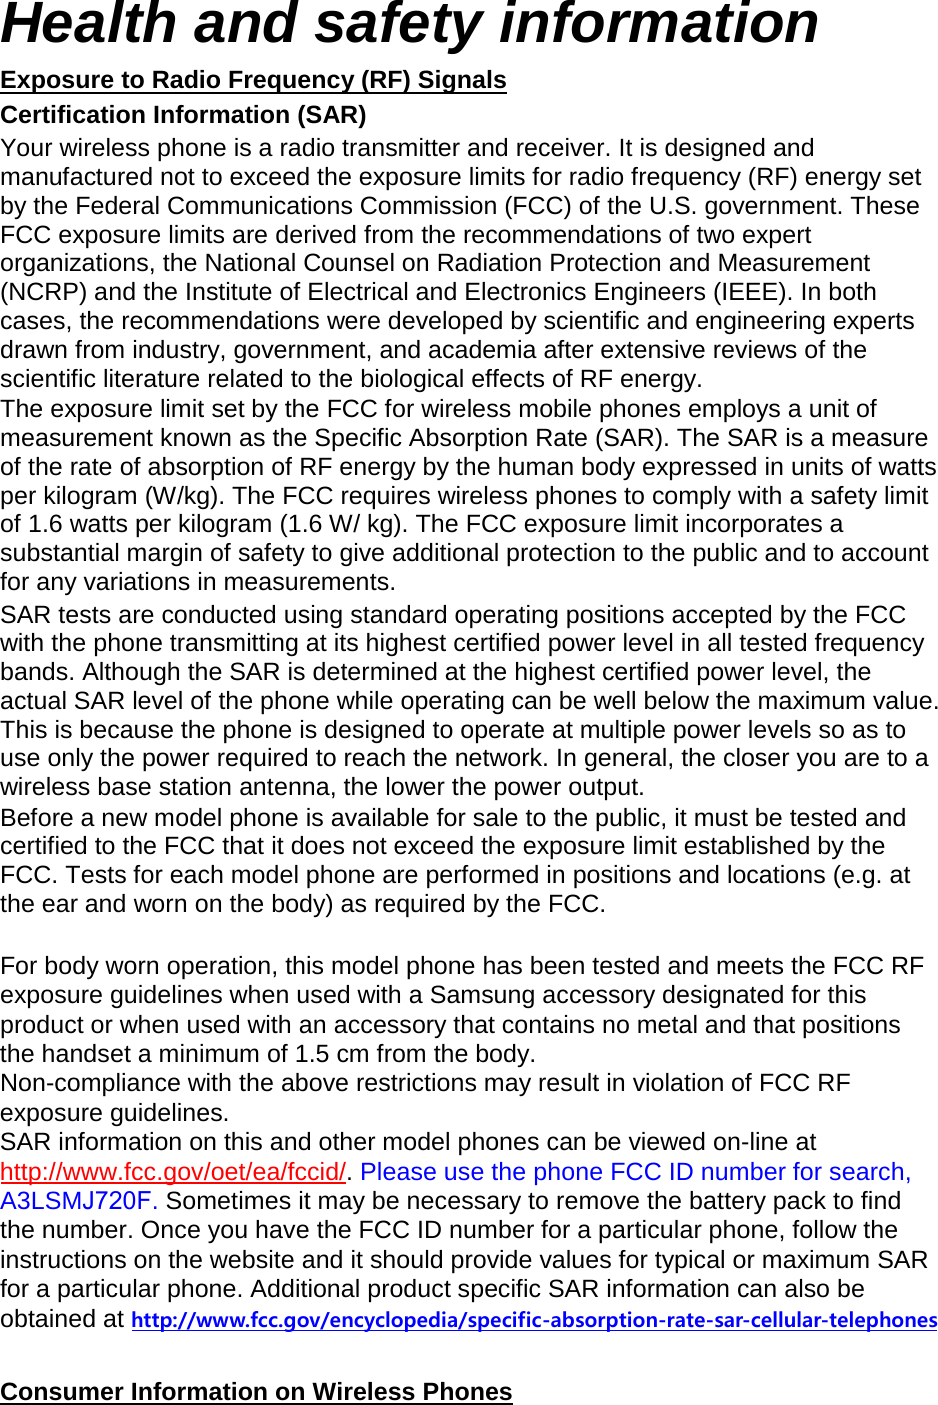 Health and safety information Exposure to Radio Frequency (RF) Signals Certification Information (SAR) Your wireless phone is a radio transmitter and receiver. It is designed and manufactured not to exceed the exposure limits for radio frequency (RF) energy set by the Federal Communications Commission (FCC) of the U.S. government. These FCC exposure limits are derived from the recommendations of two expert organizations, the National Counsel on Radiation Protection and Measurement (NCRP) and the Institute of Electrical and Electronics Engineers (IEEE). In both cases, the recommendations were developed by scientific and engineering experts drawn from industry, government, and academia after extensive reviews of the scientific literature related to the biological effects of RF energy. The exposure limit set by the FCC for wireless mobile phones employs a unit of measurement known as the Specific Absorption Rate (SAR). The SAR is a measure of the rate of absorption of RF energy by the human body expressed in units of watts per kilogram (W/kg). The FCC requires wireless phones to comply with a safety limit of 1.6 watts per kilogram (1.6 W/ kg). The FCC exposure limit incorporates a substantial margin of safety to give additional protection to the public and to account for any variations in measurements. SAR tests are conducted using standard operating positions accepted by the FCC with the phone transmitting at its highest certified power level in all tested frequency bands. Although the SAR is determined at the highest certified power level, the actual SAR level of the phone while operating can be well below the maximum value. This is because the phone is designed to operate at multiple power levels so as to use only the power required to reach the network. In general, the closer you are to a wireless base station antenna, the lower the power output. Before a new model phone is available for sale to the public, it must be tested and certified to the FCC that it does not exceed the exposure limit established by the FCC. Tests for each model phone are performed in positions and locations (e.g. at the ear and worn on the body) as required by the FCC.     For body worn operation, this model phone has been tested and meets the FCC RF exposure guidelines when used with a Samsung accessory designated for this product or when used with an accessory that contains no metal and that positions the handset a minimum of 1.5 cm from the body.  Non-compliance with the above restrictions may result in violation of FCC RF exposure guidelines. SAR information on this and other model phones can be viewed on-line at http://www.fcc.gov/oet/ea/fccid/. Please use the phone FCC ID number for search, A3LSMJ720F. Sometimes it may be necessary to remove the battery pack to find the number. Once you have the FCC ID number for a particular phone, follow the instructions on the website and it should provide values for typical or maximum SAR for a particular phone. Additional product specific SAR information can also be obtained at http://www.fcc.gov/encyclopedia/specific-absorption-rate-sar-cellular-telephonesConsumer Information on Wireless Phones 